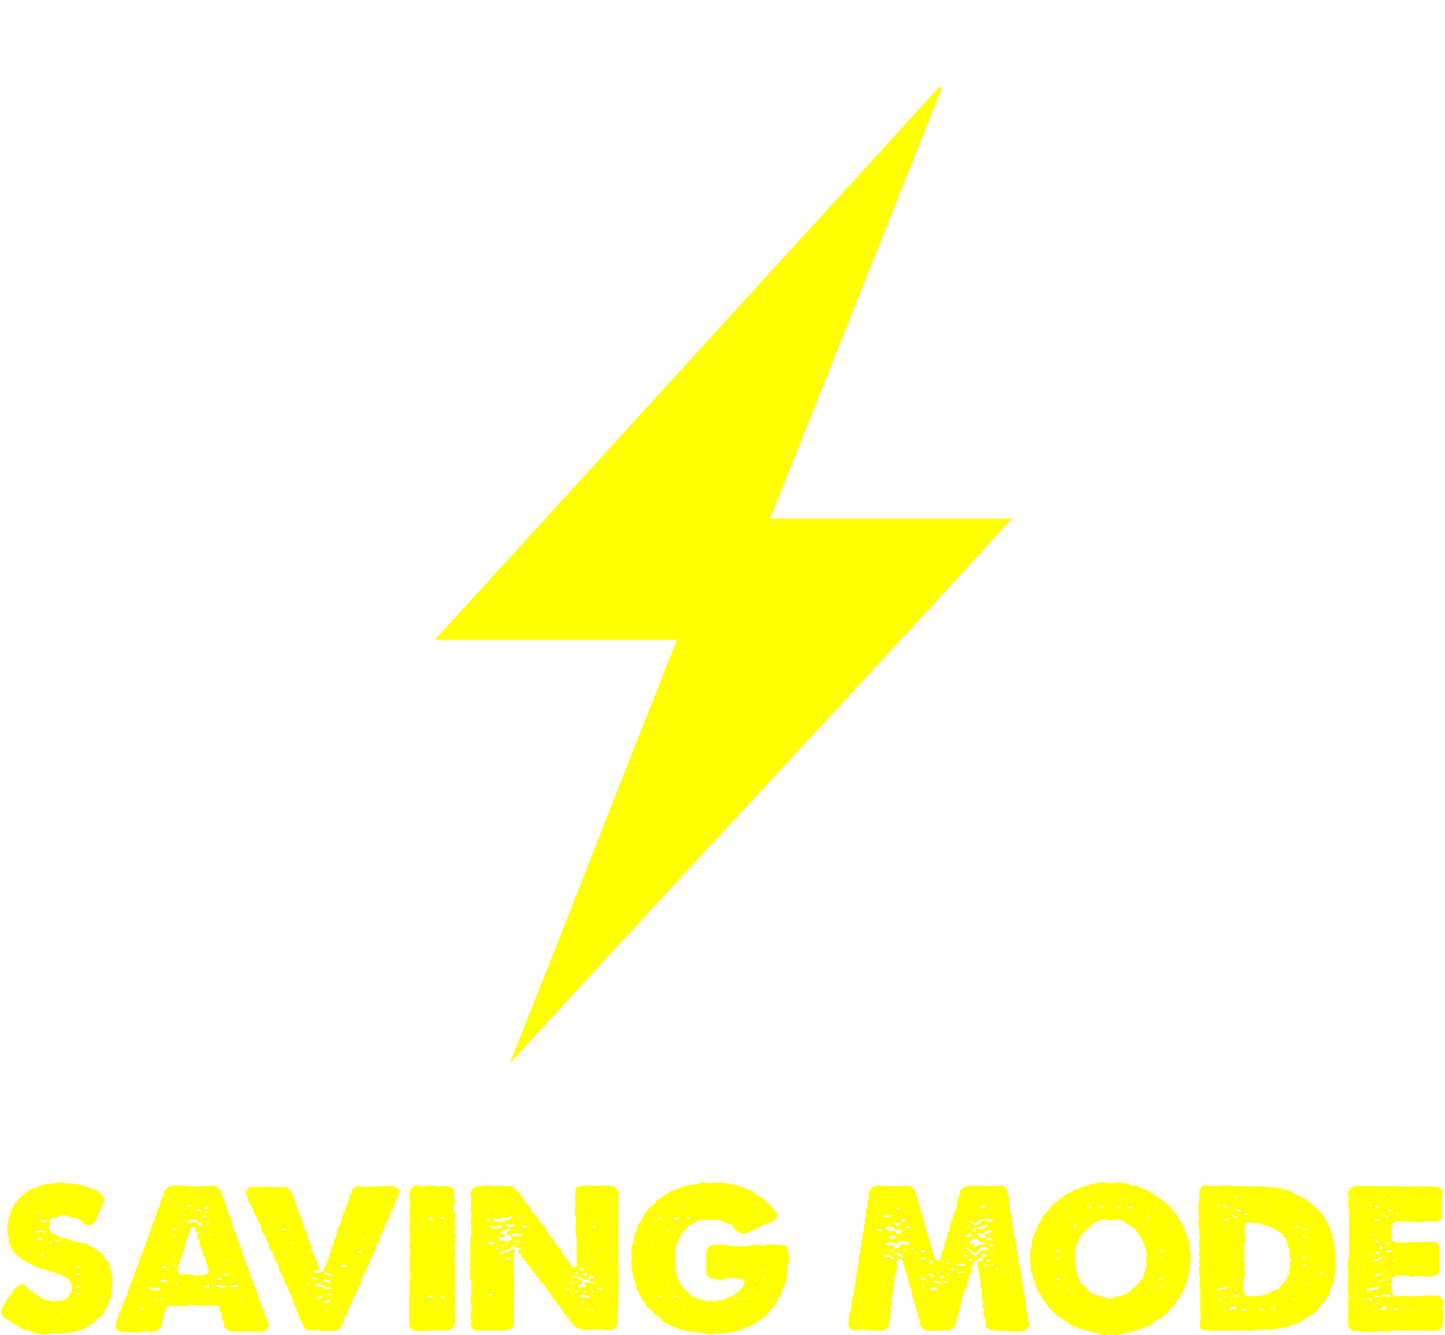 I am in Energy Saving Mode